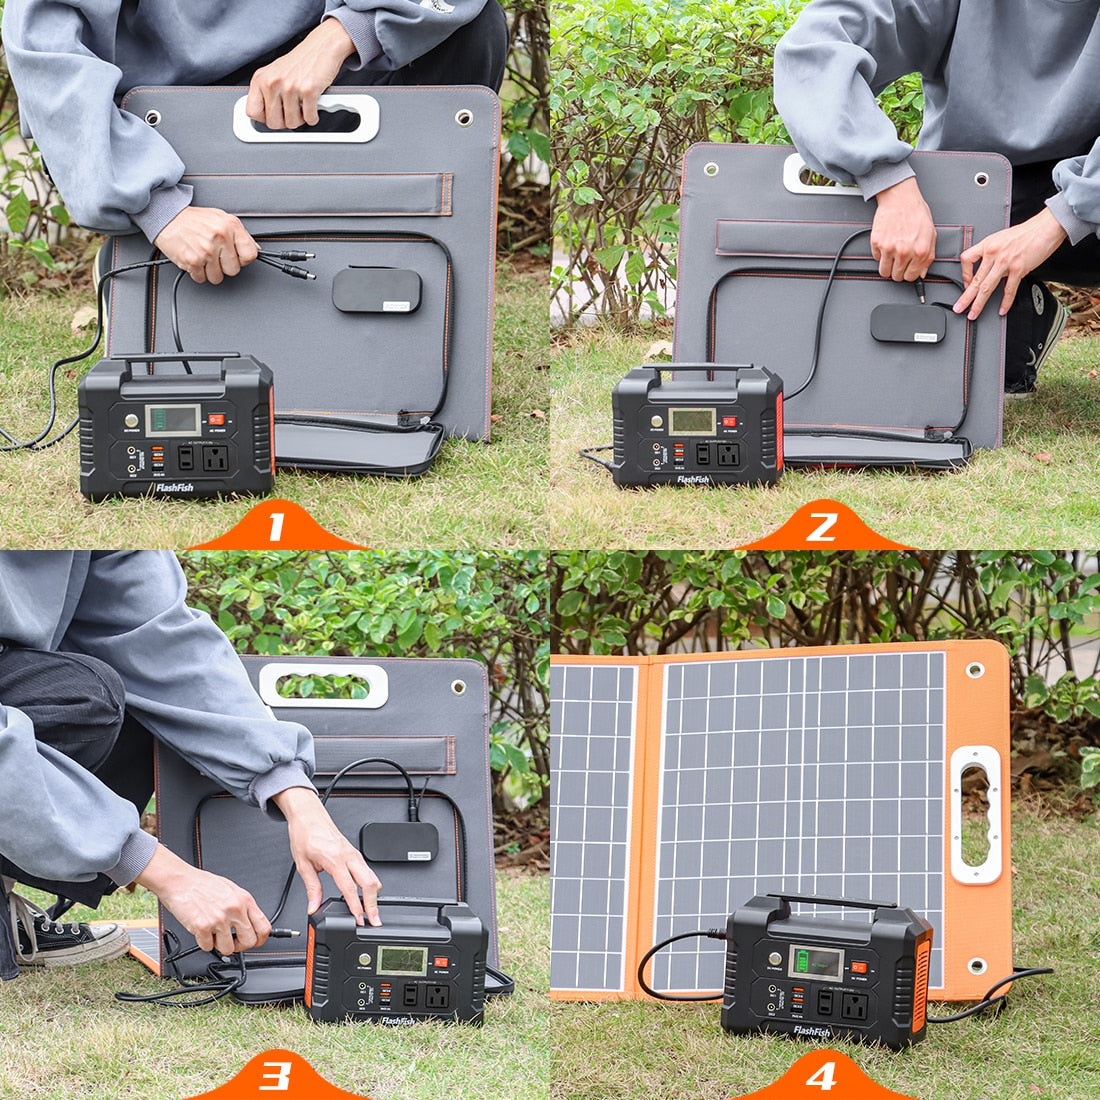 120W Portable Solar Power Station Set 26400mAh With 60W Foldable Solar Panel Solar Charger Power Bank Station For Camping Power